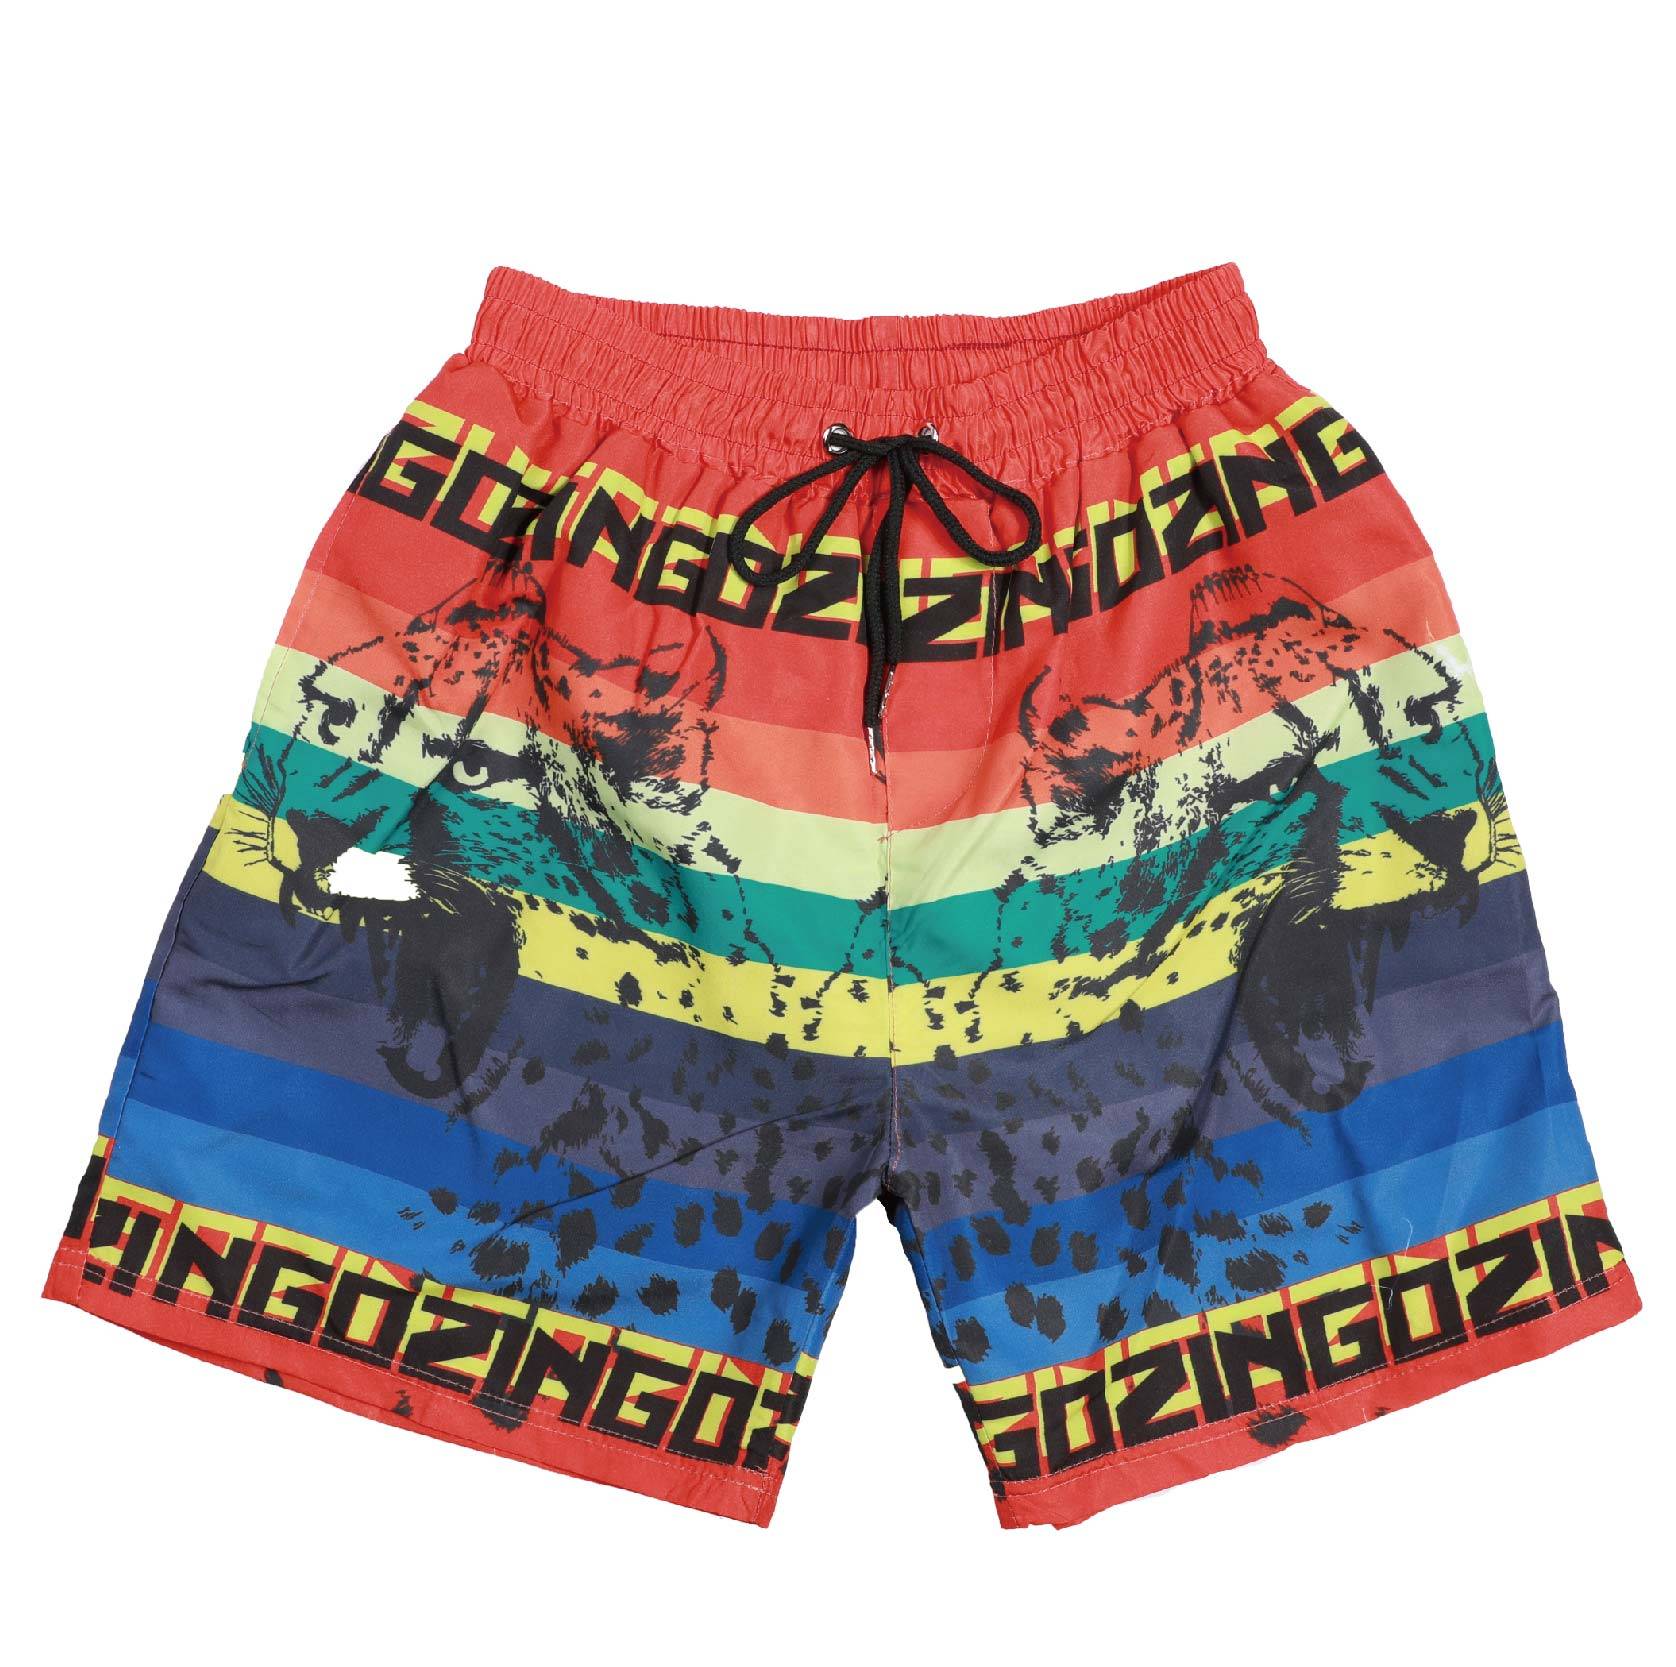 One of Hottest for Ripped Denim Jeans - Ngozi Beach Shorts Men Quick Dry leopard head Printed Elastic Waist – Fullerton